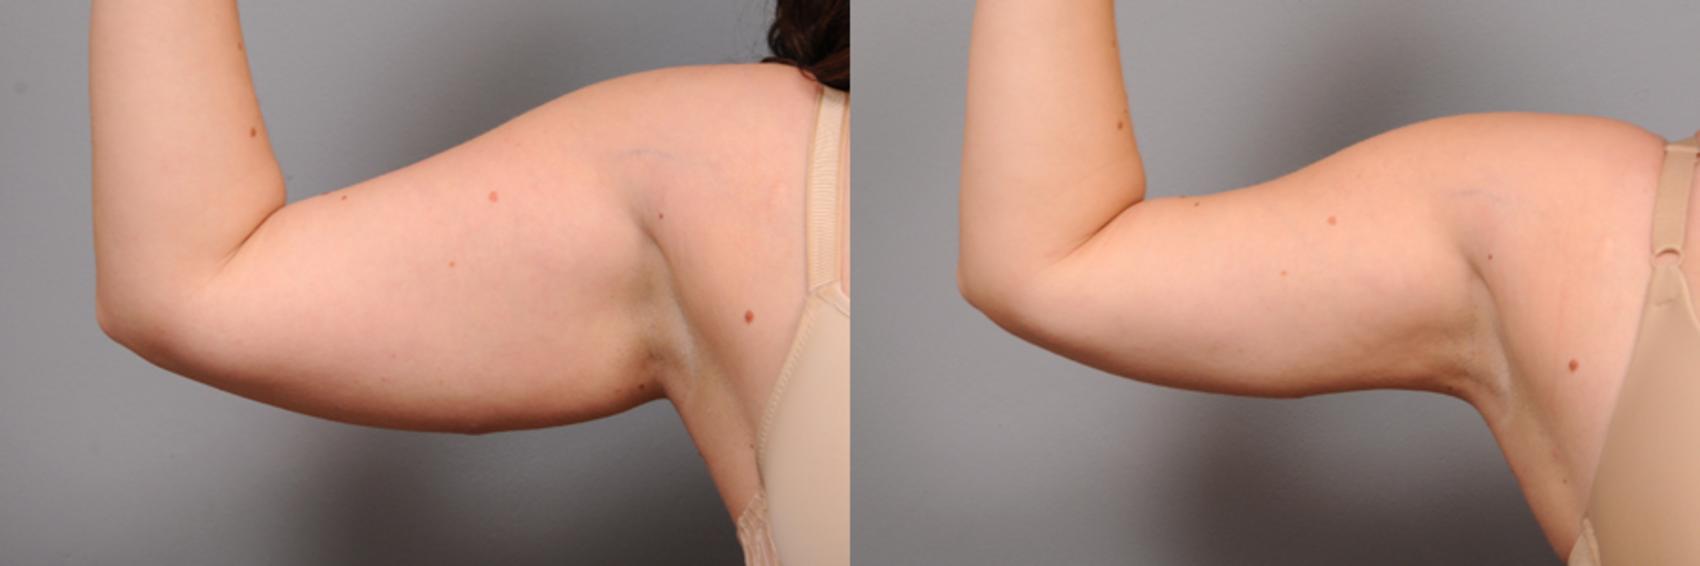 Arm Liposuction in NYC & Manhattan  Board-Certified Plastic Surgeon Dr.  Sterry